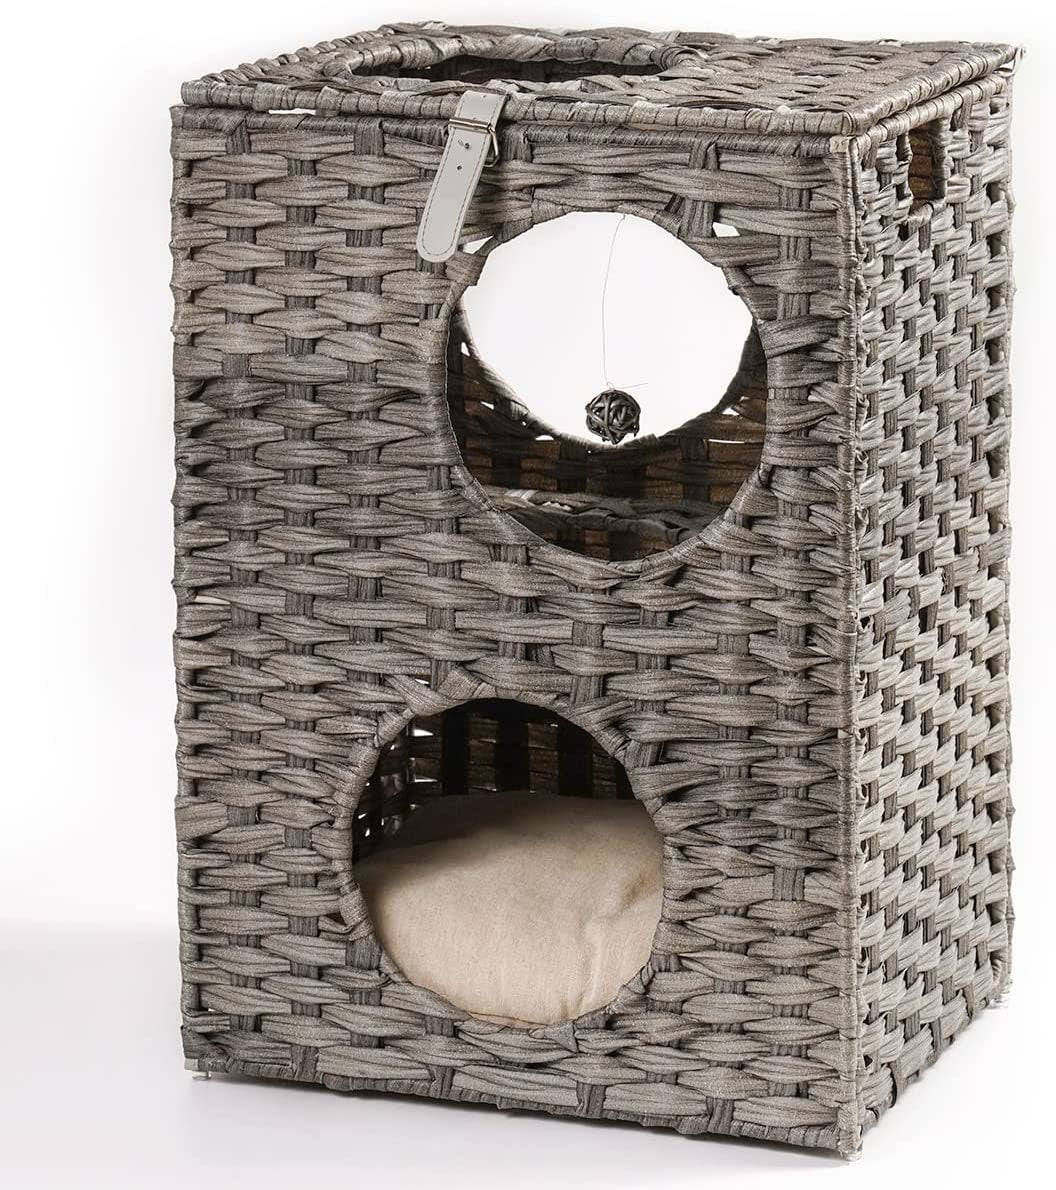 MEWOOFUN Cat House Wicker Cat Bed for Indoor Cats Woven Rattan Cat - Taplike